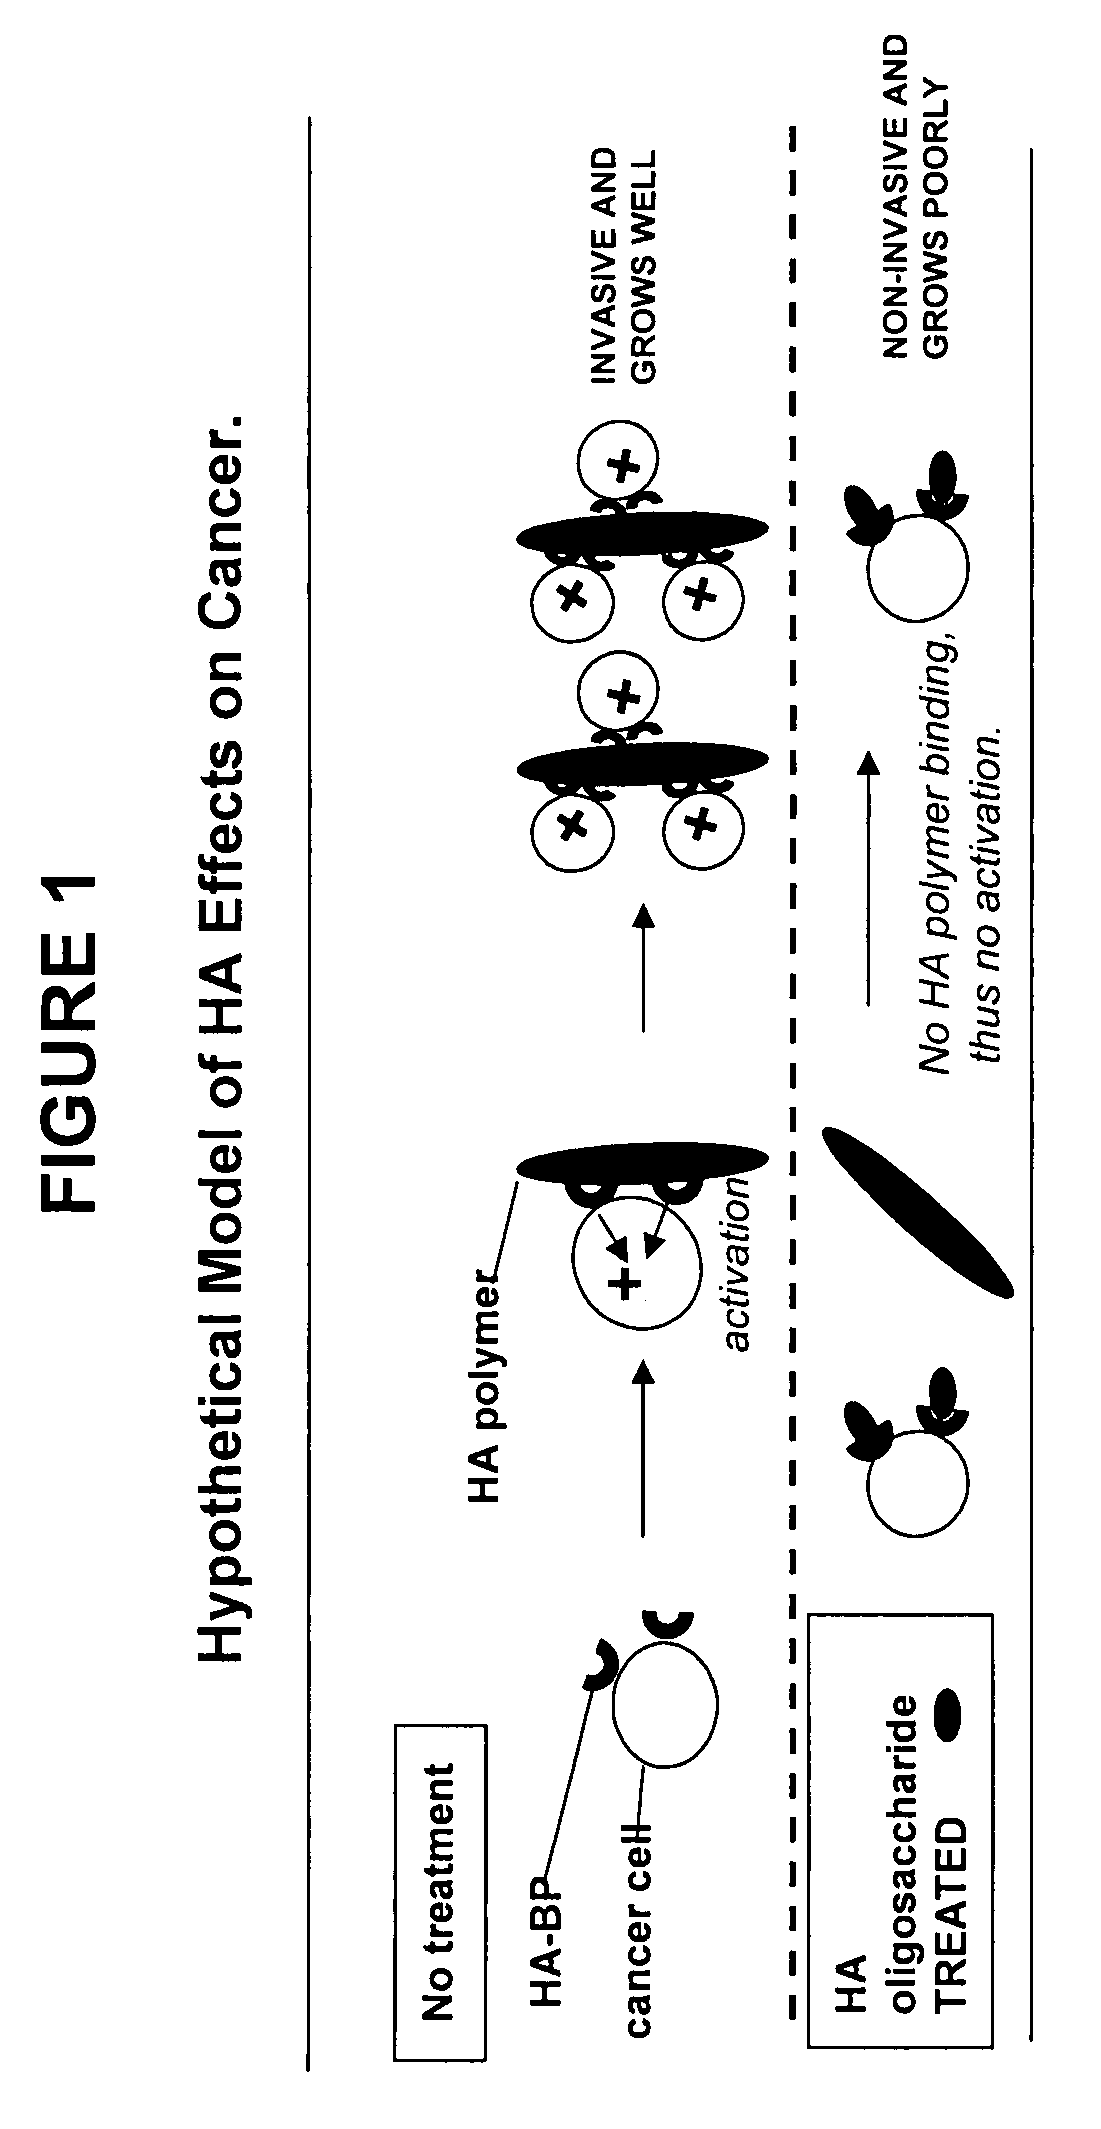 Methods of selectively treating diseases with specific glycosaminoglycan polymers